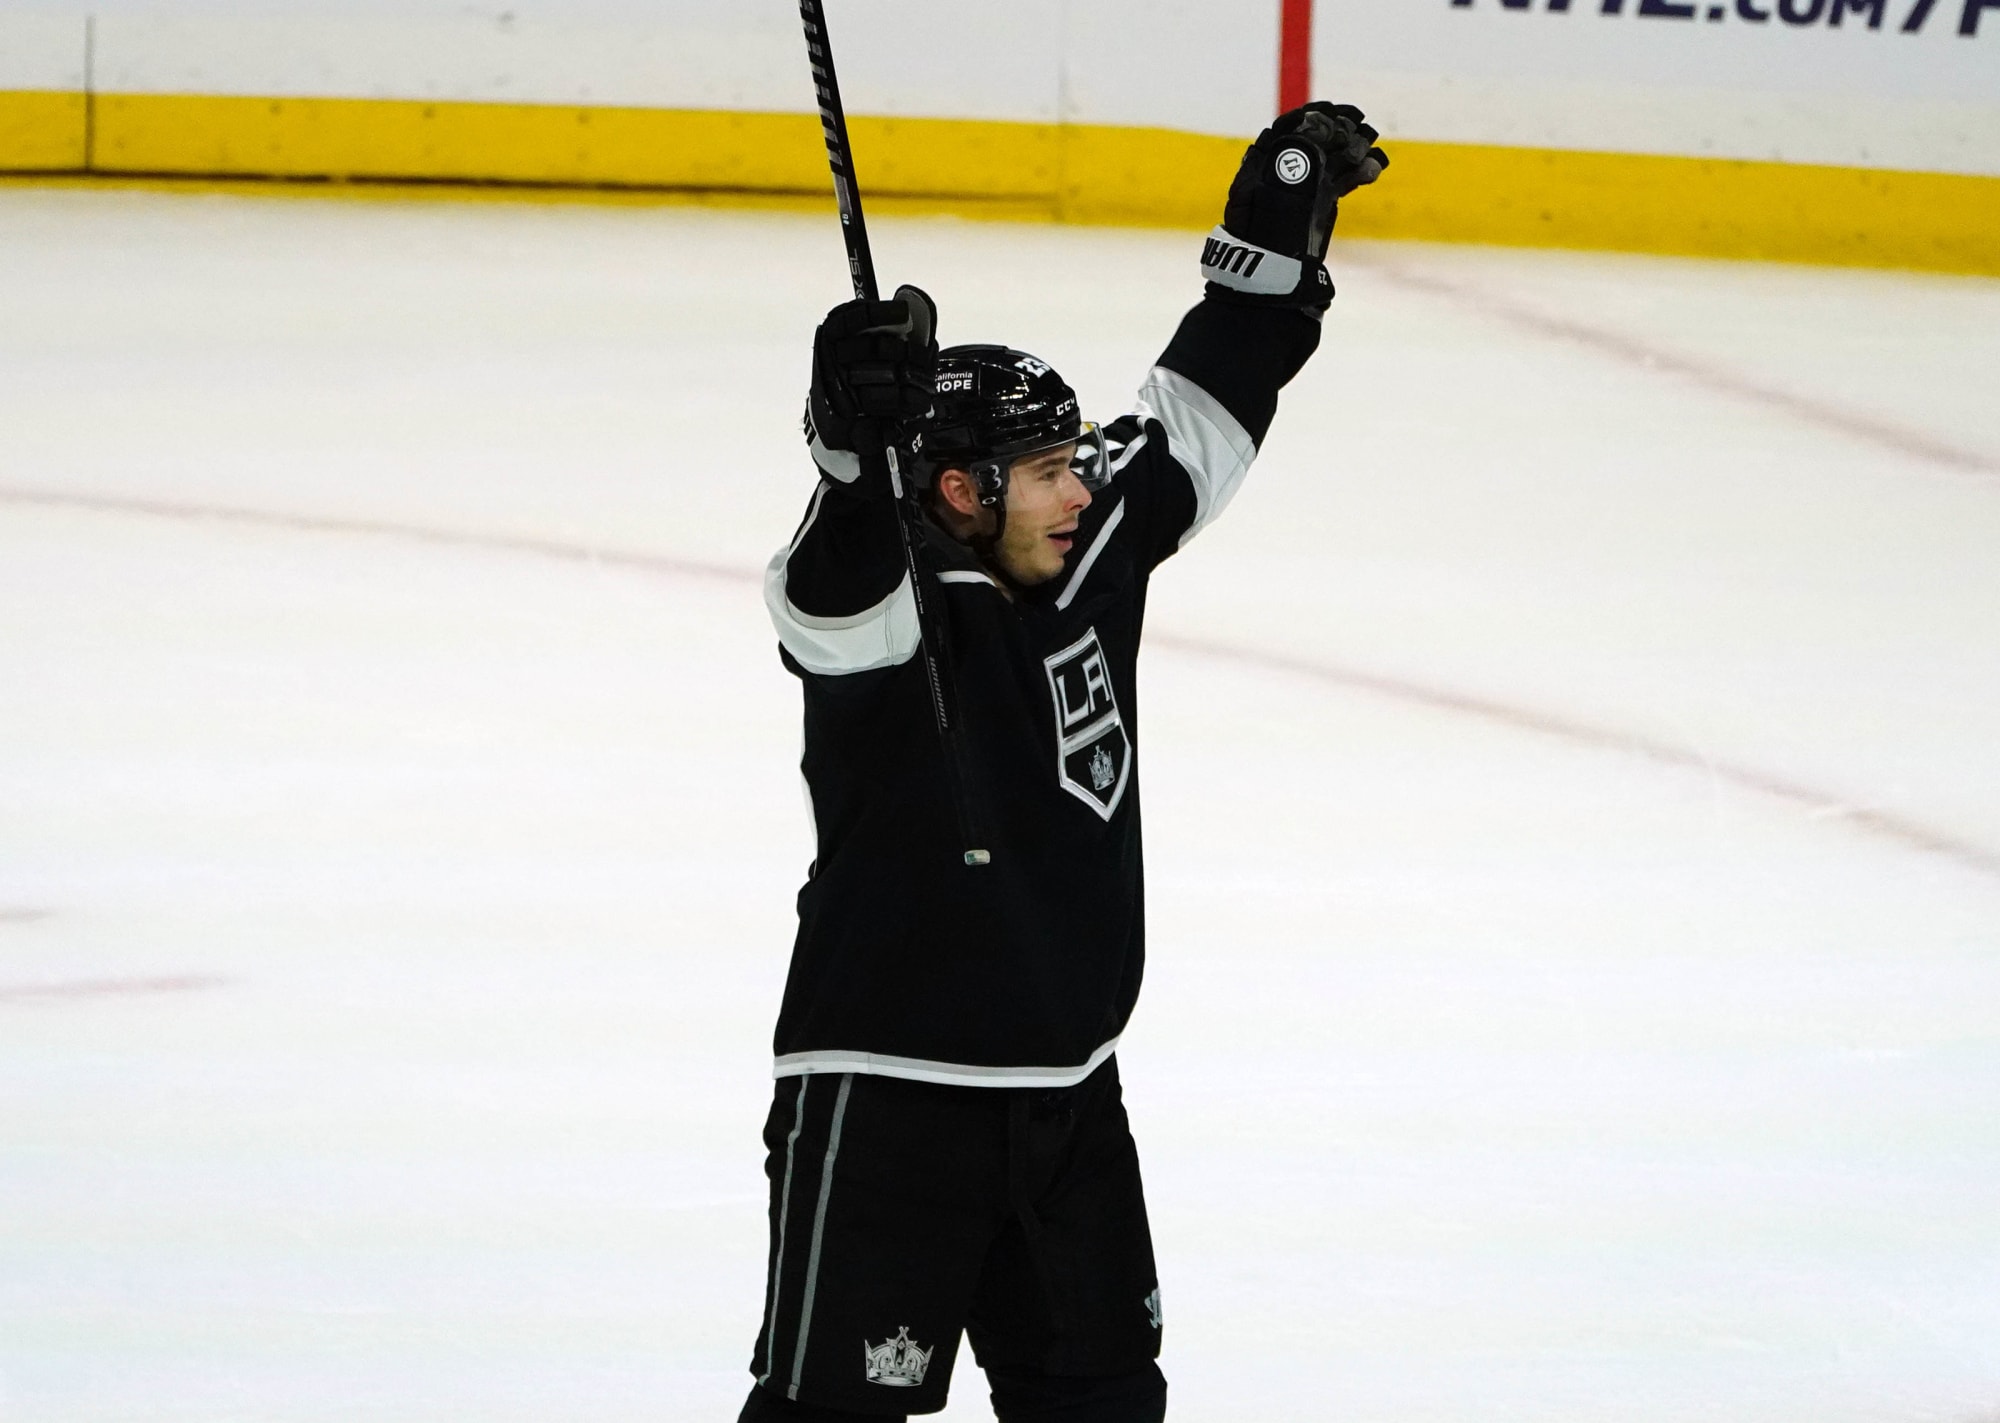 Los Angeles Kings F Dustin Brown Putting His Team in Tough Position